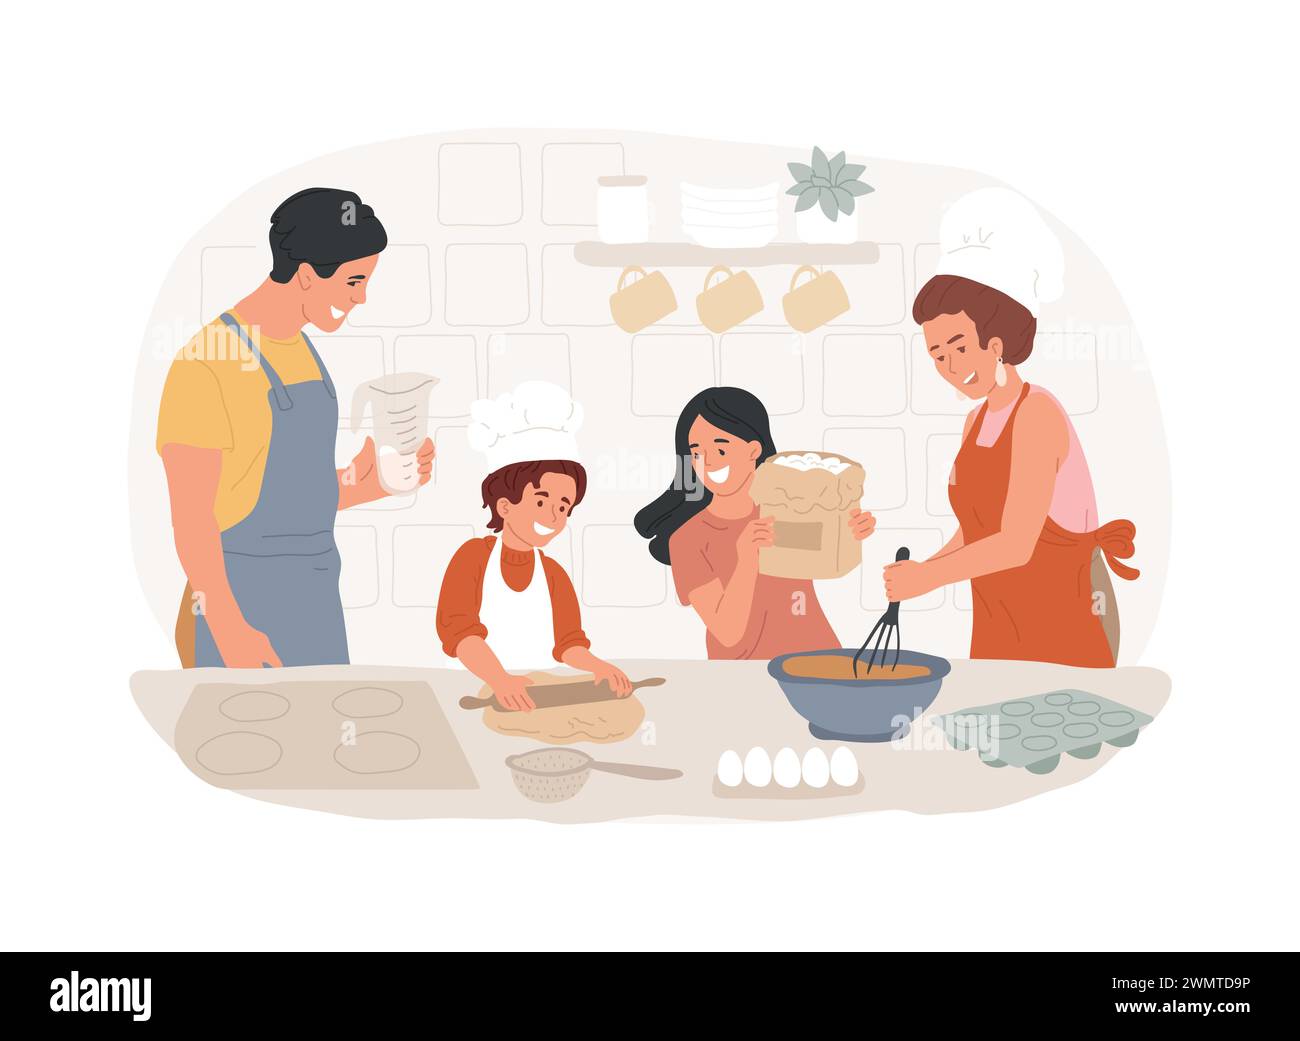 Bake together isolated concept vector illustration. Family fun during quarantine, home sitting ideas, spending time together during isolation, adults baking with children vector concept. Stock Vector